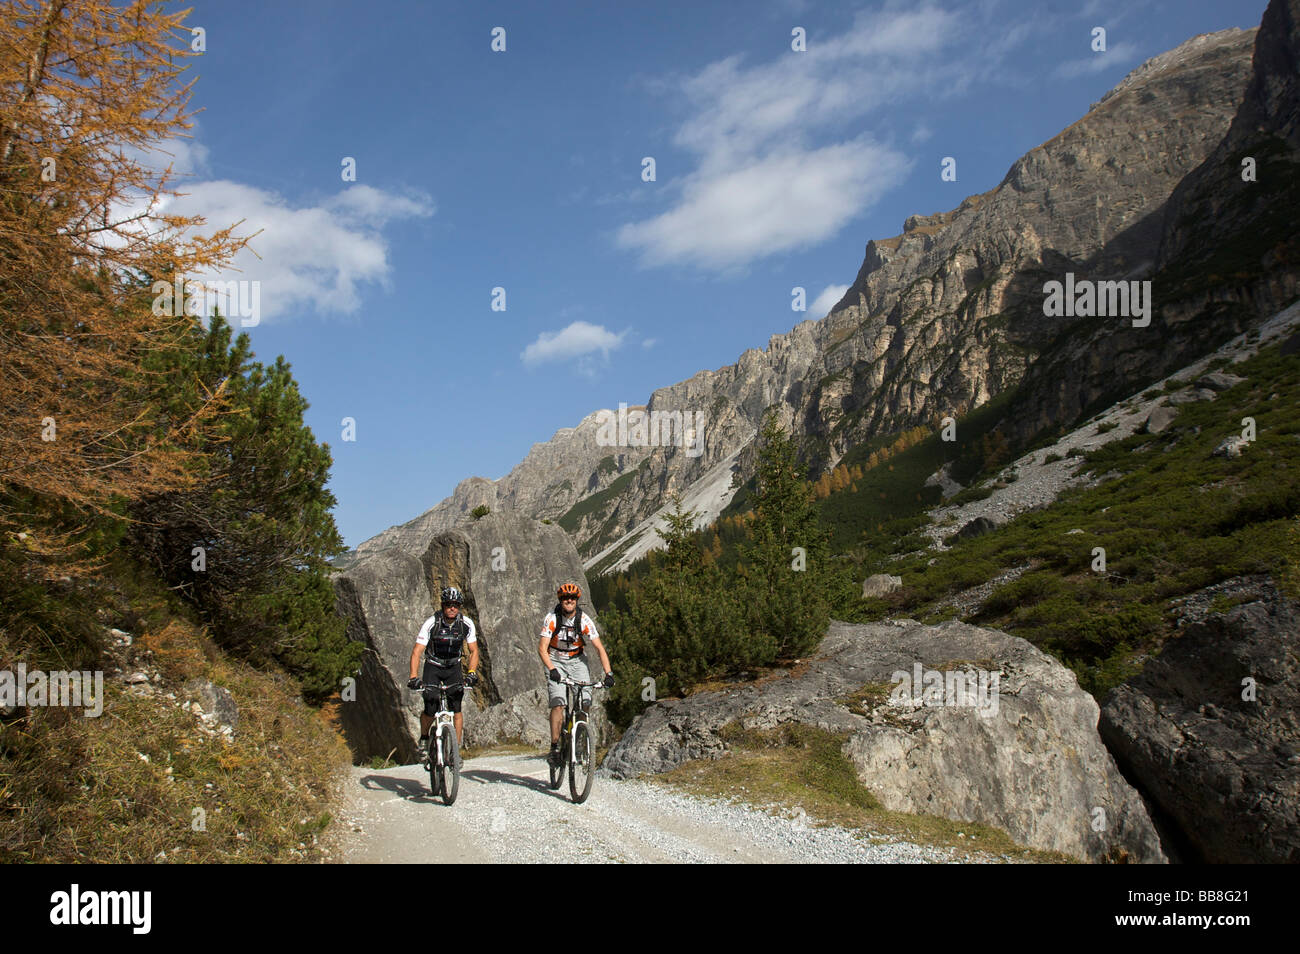 Mountainbikers at the Pinnisalm pasture in the Pinnistal valley, Tyrol, Austria Stock Photo